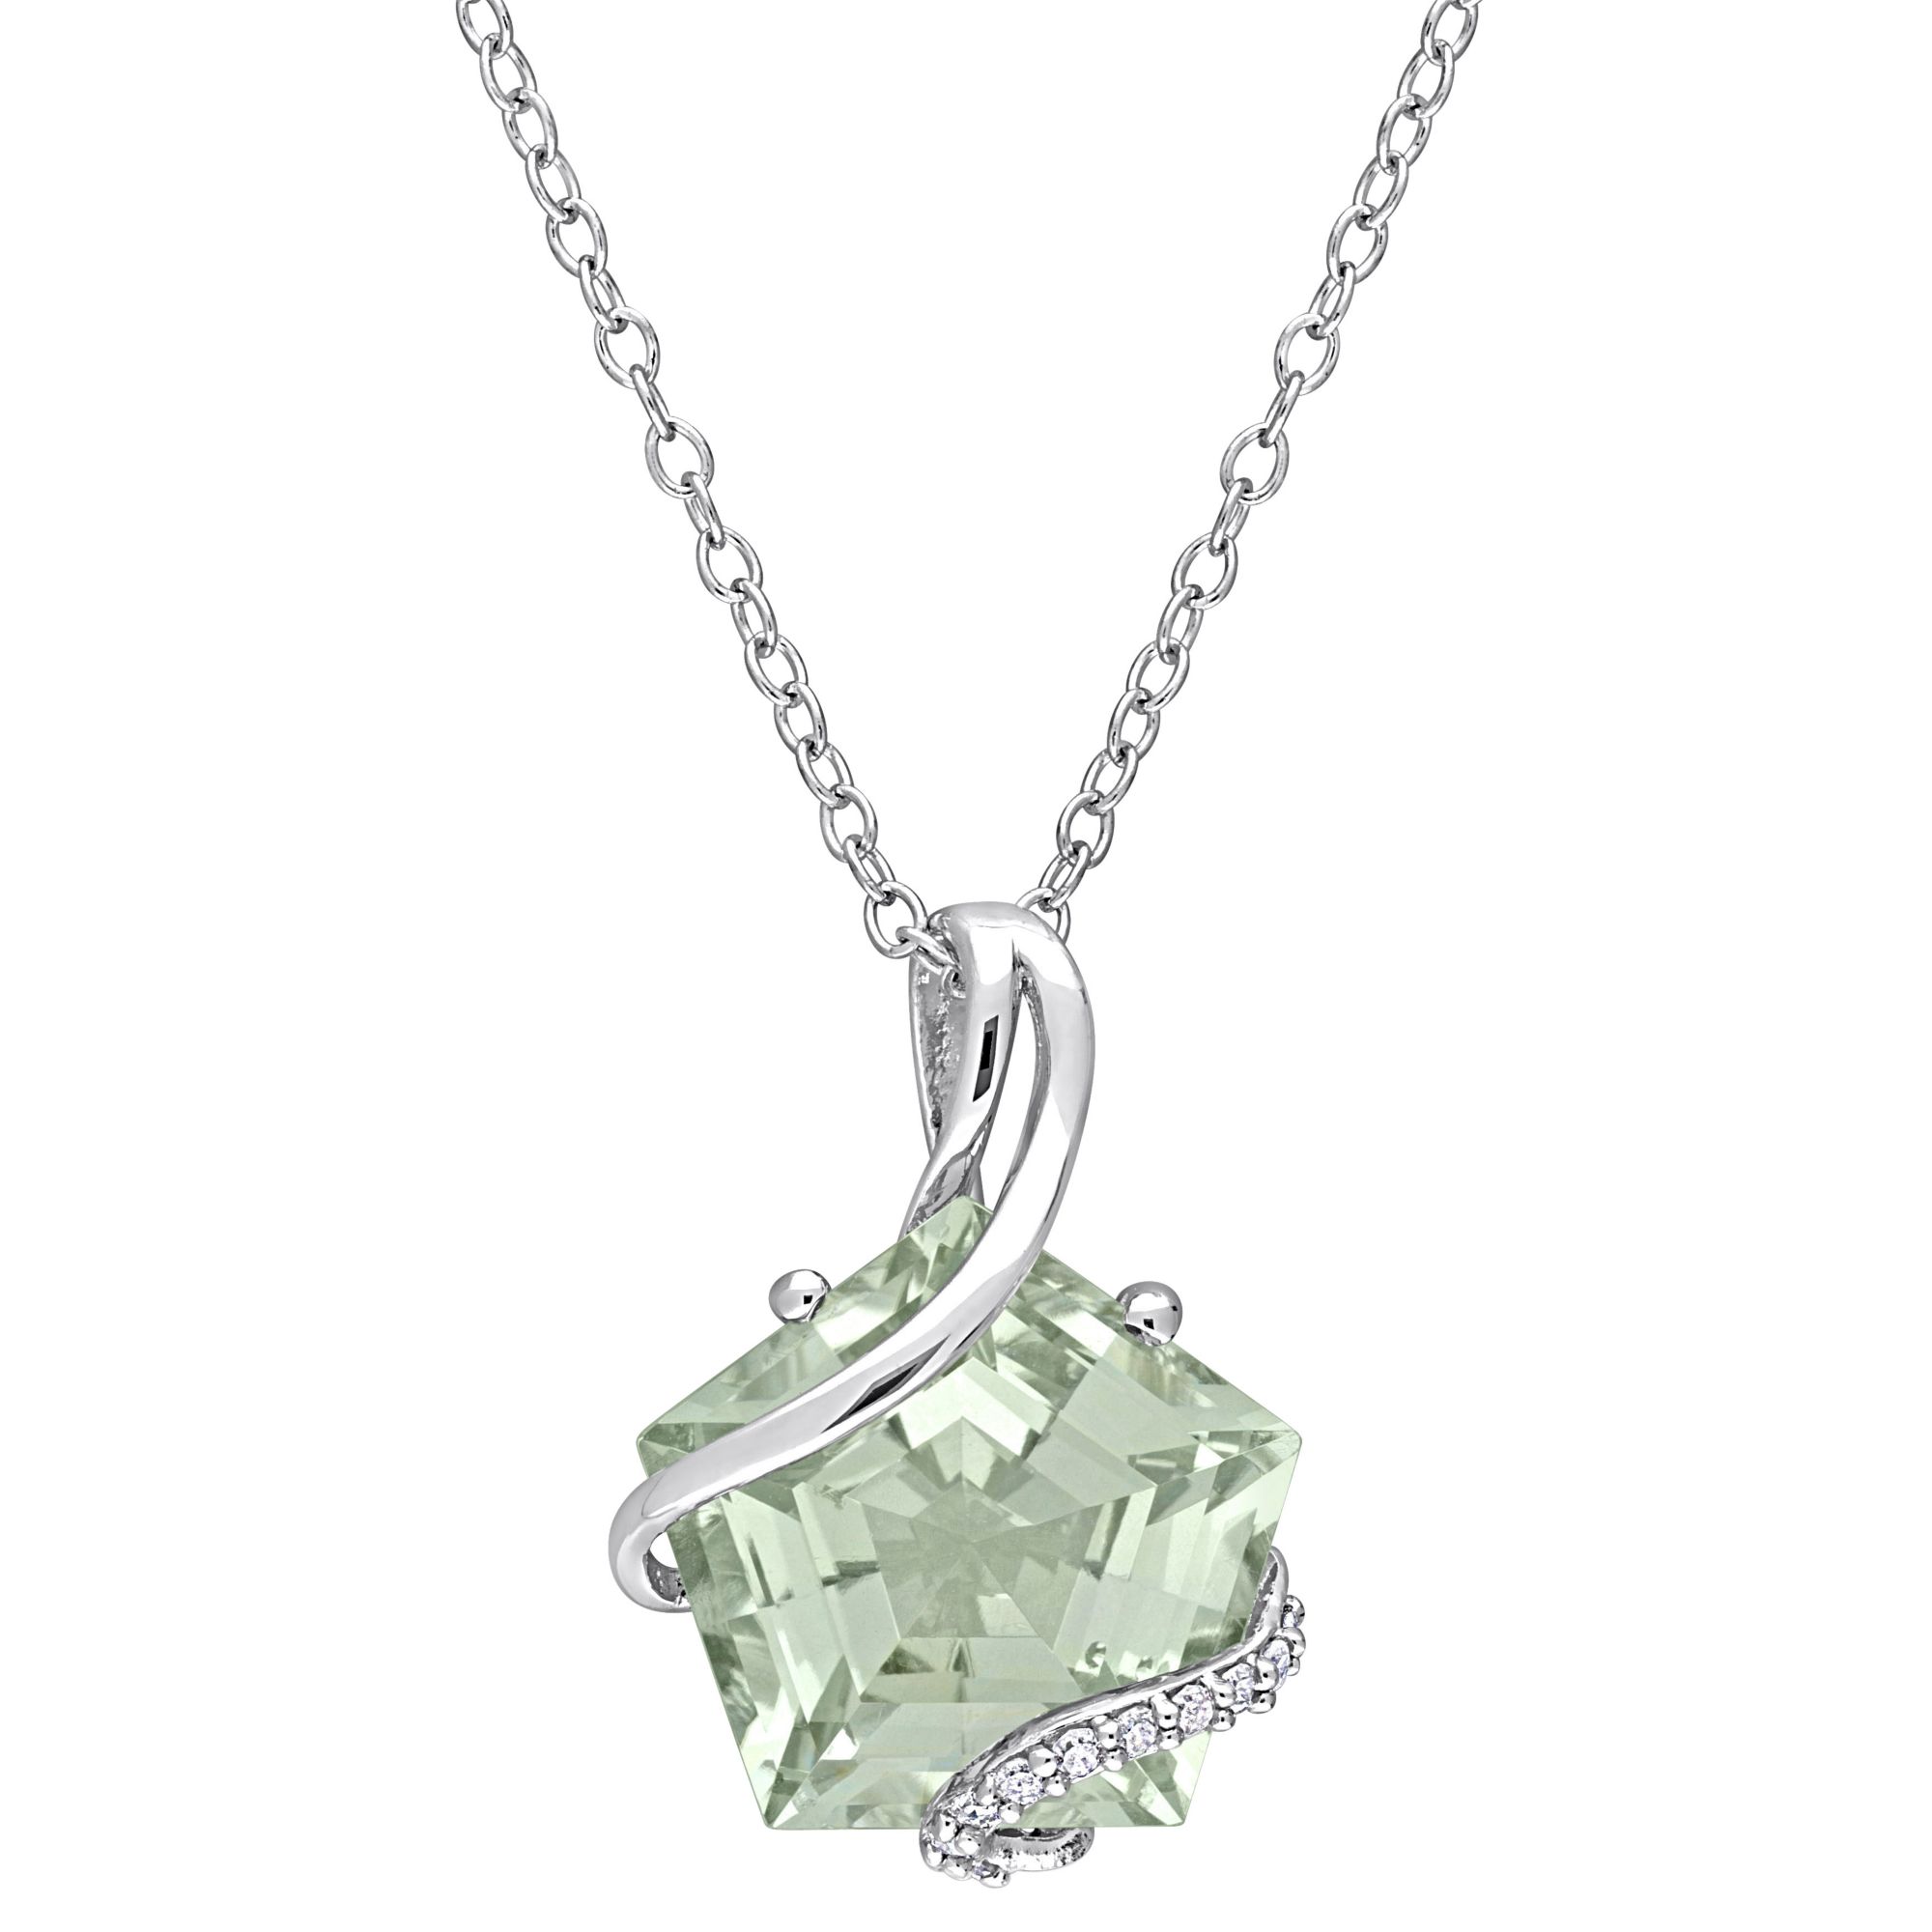 6.5 ct. t.g.w Green Quartz and Diamond Accent Swirl Necklace in Sterling Silver